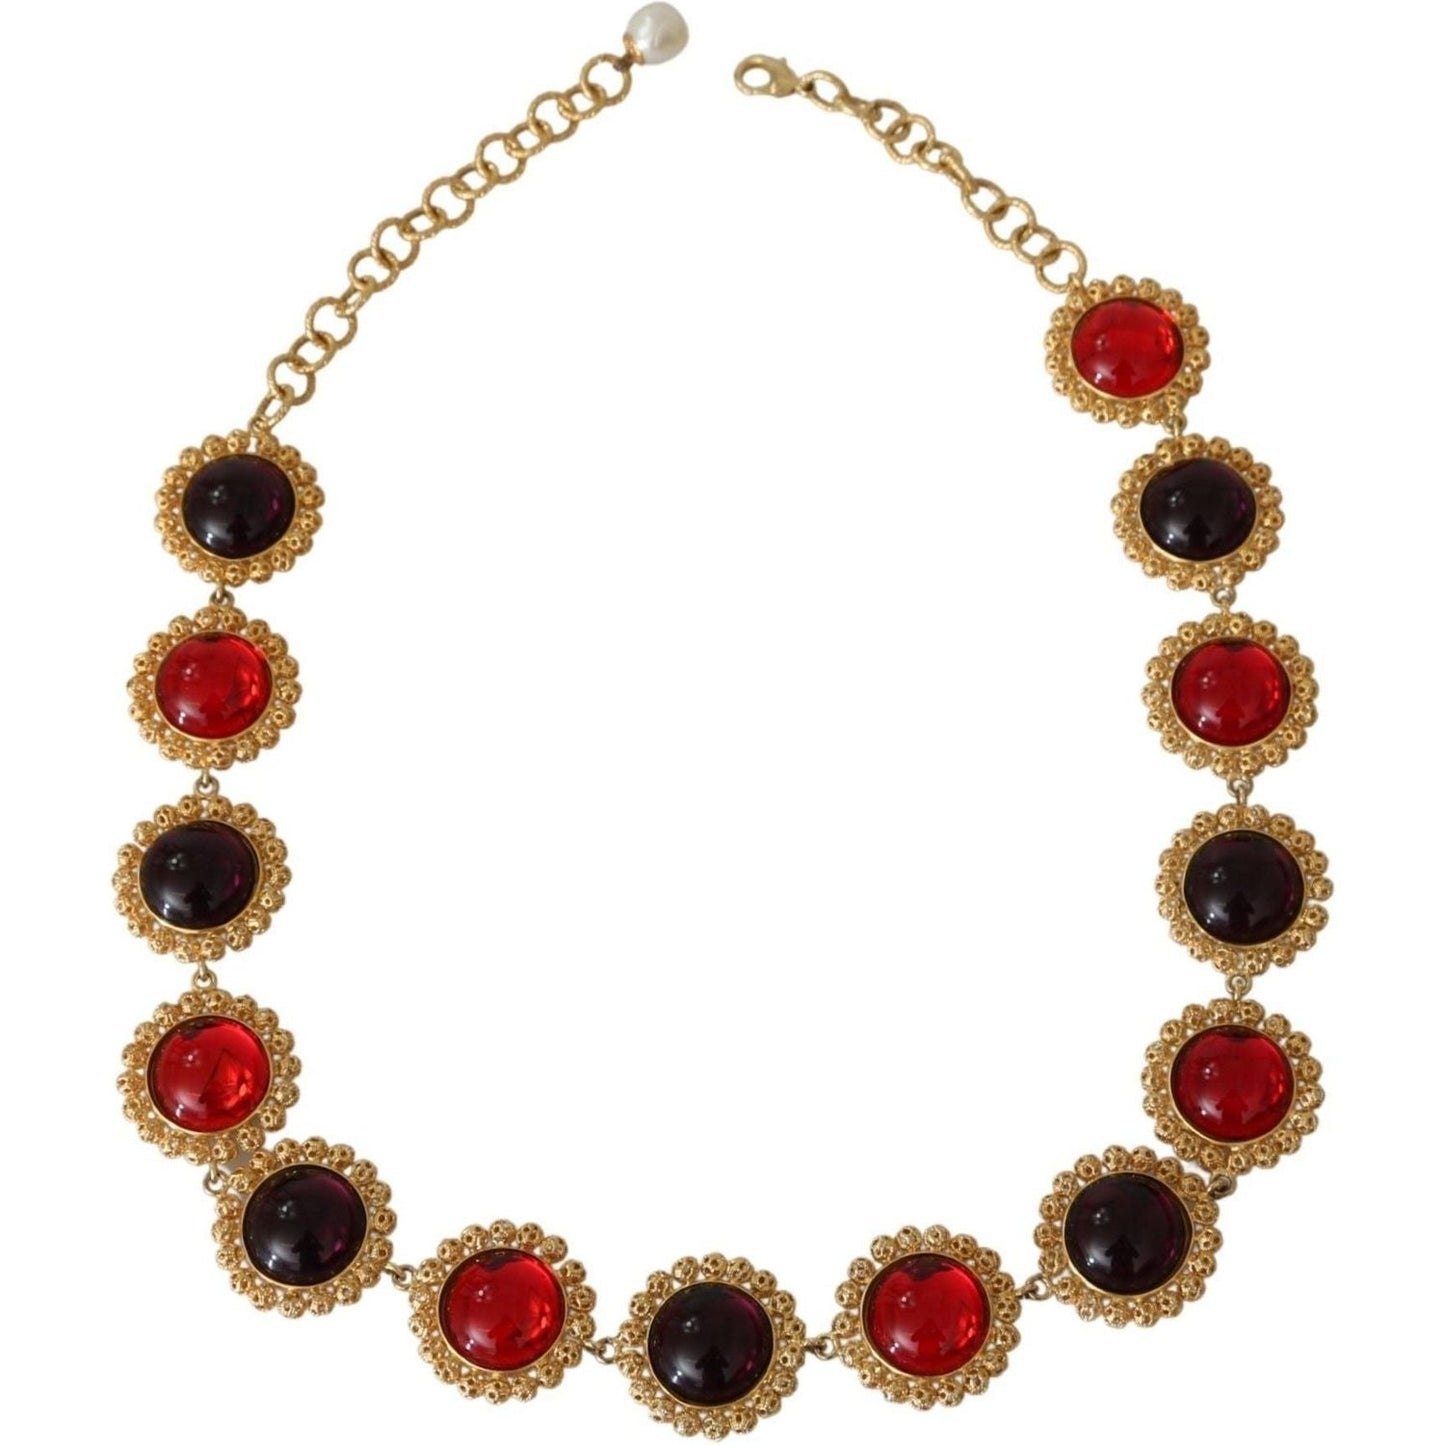 Dolce & Gabbana Elegant Crystal Charm Statement Necklace Necklace red-purple-crystal-floral-chain-statement-gold-brass-necklace